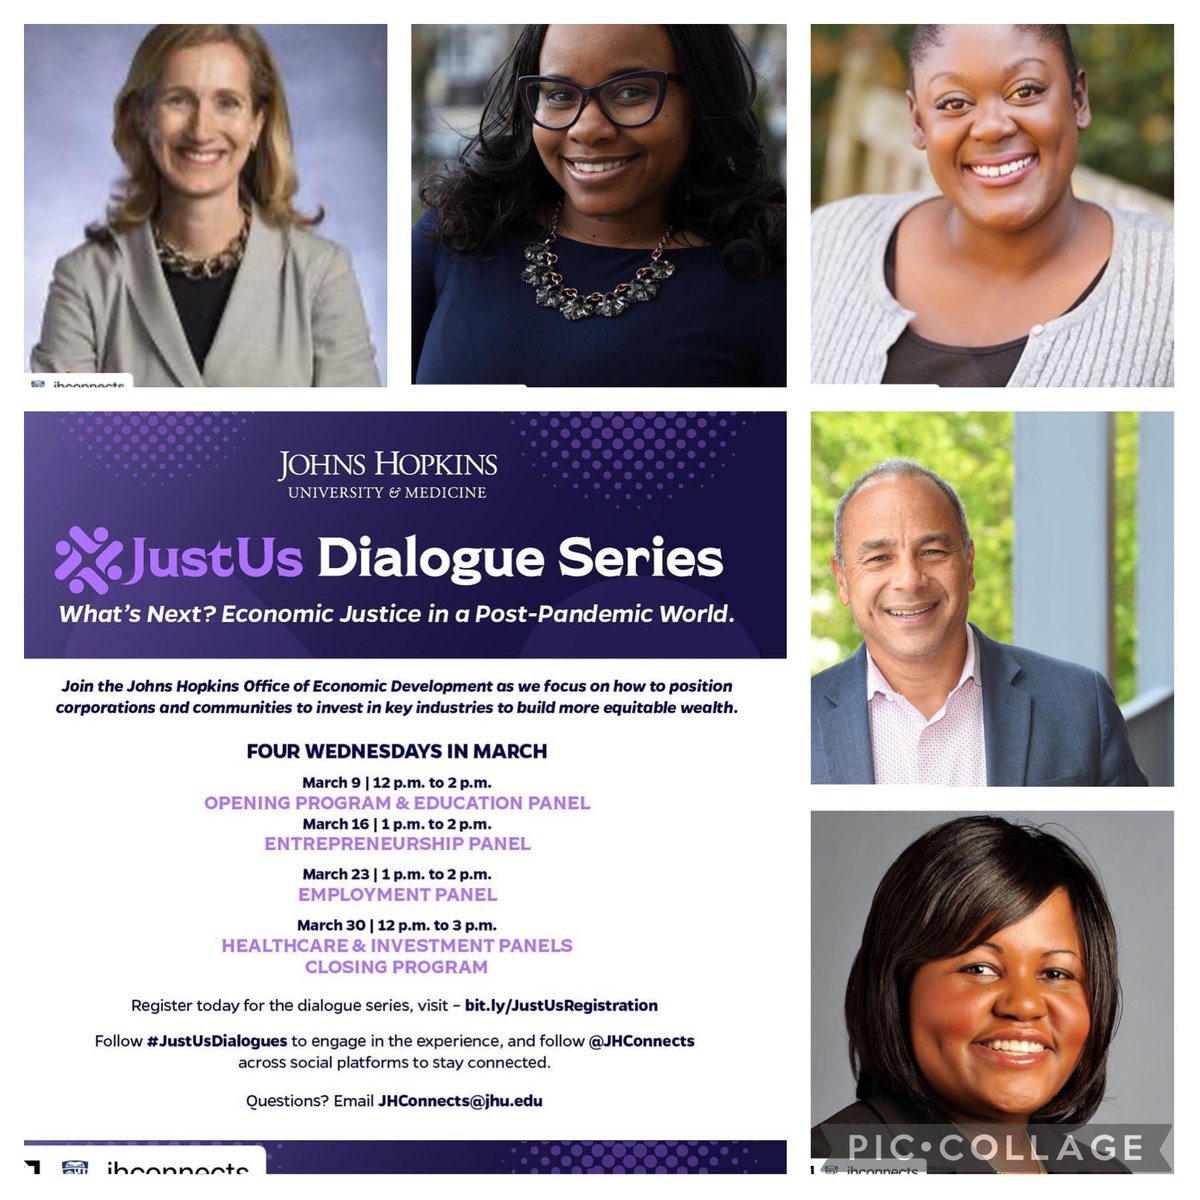 THIS WEDNESDAY at 1 PM! Education experts join the JustUs Dialogue Series to discuss the accessibility of higher education in a post-pandemic world. Tune in LIVE via @JHConnects Facebook Page.

To learn more about the series, and to register, head over to bit.ly/JustUsRegistra…